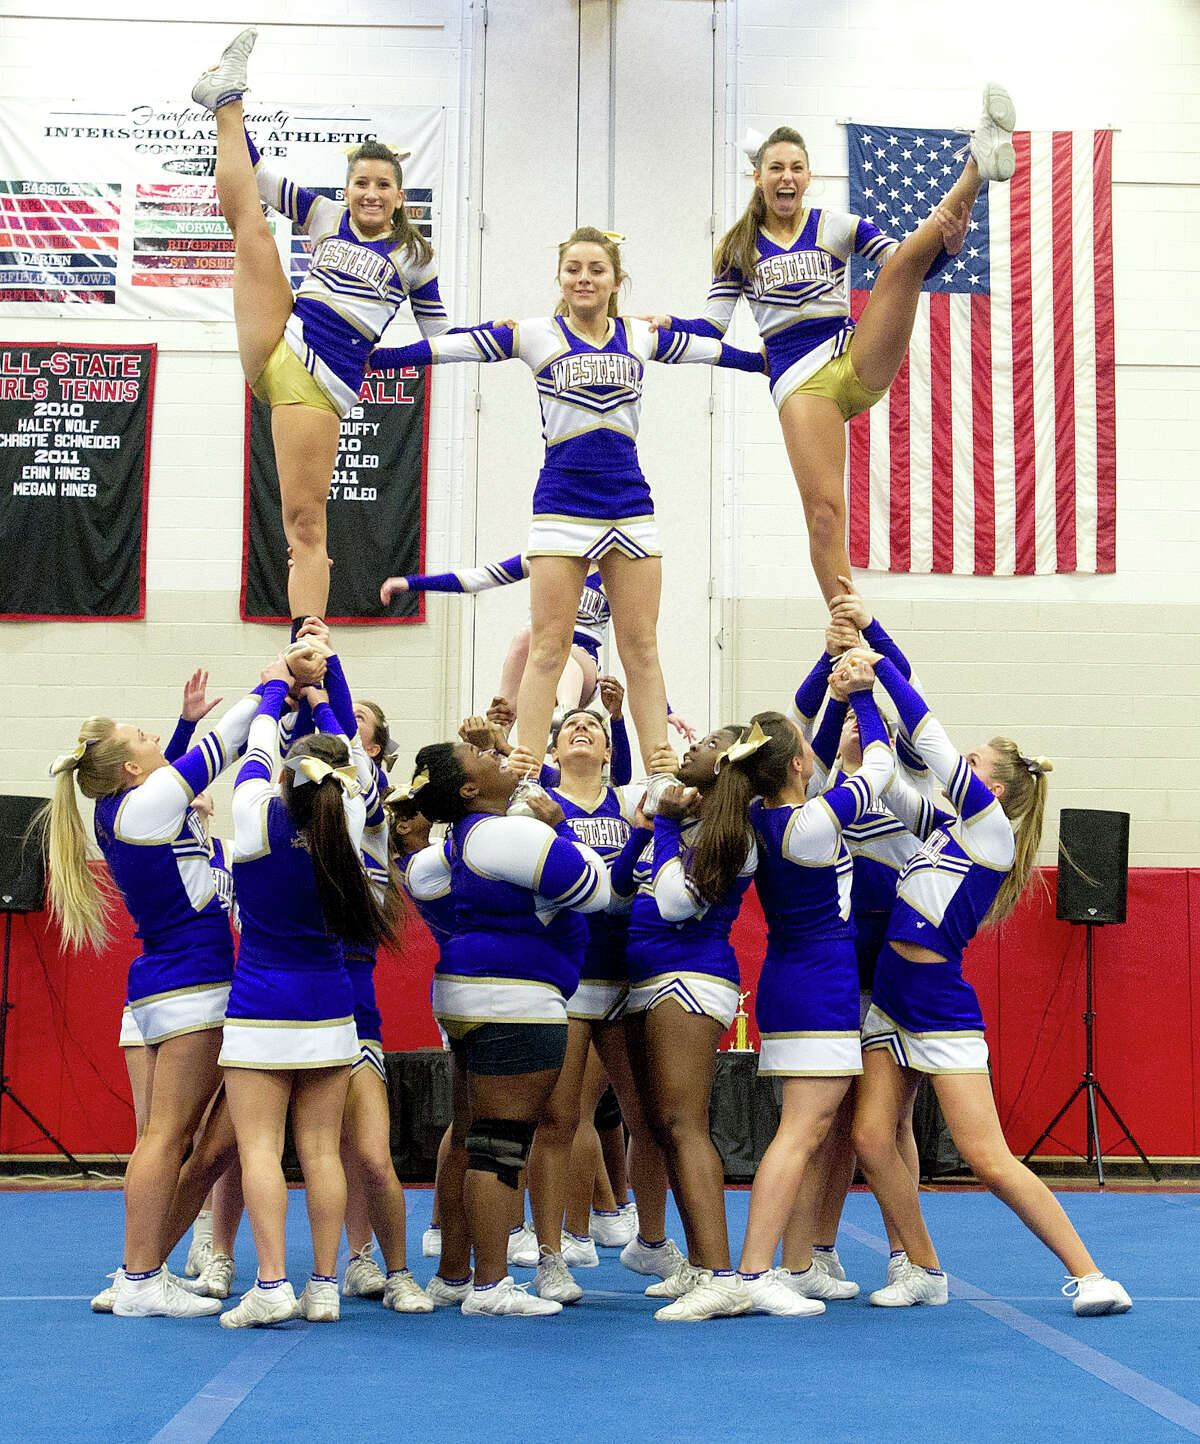 Westhill High School competes in the FCIAC cheerleading championships at Fairfield Warde High School in Fairfield, Conn., on Saturday, February 1, 2014.